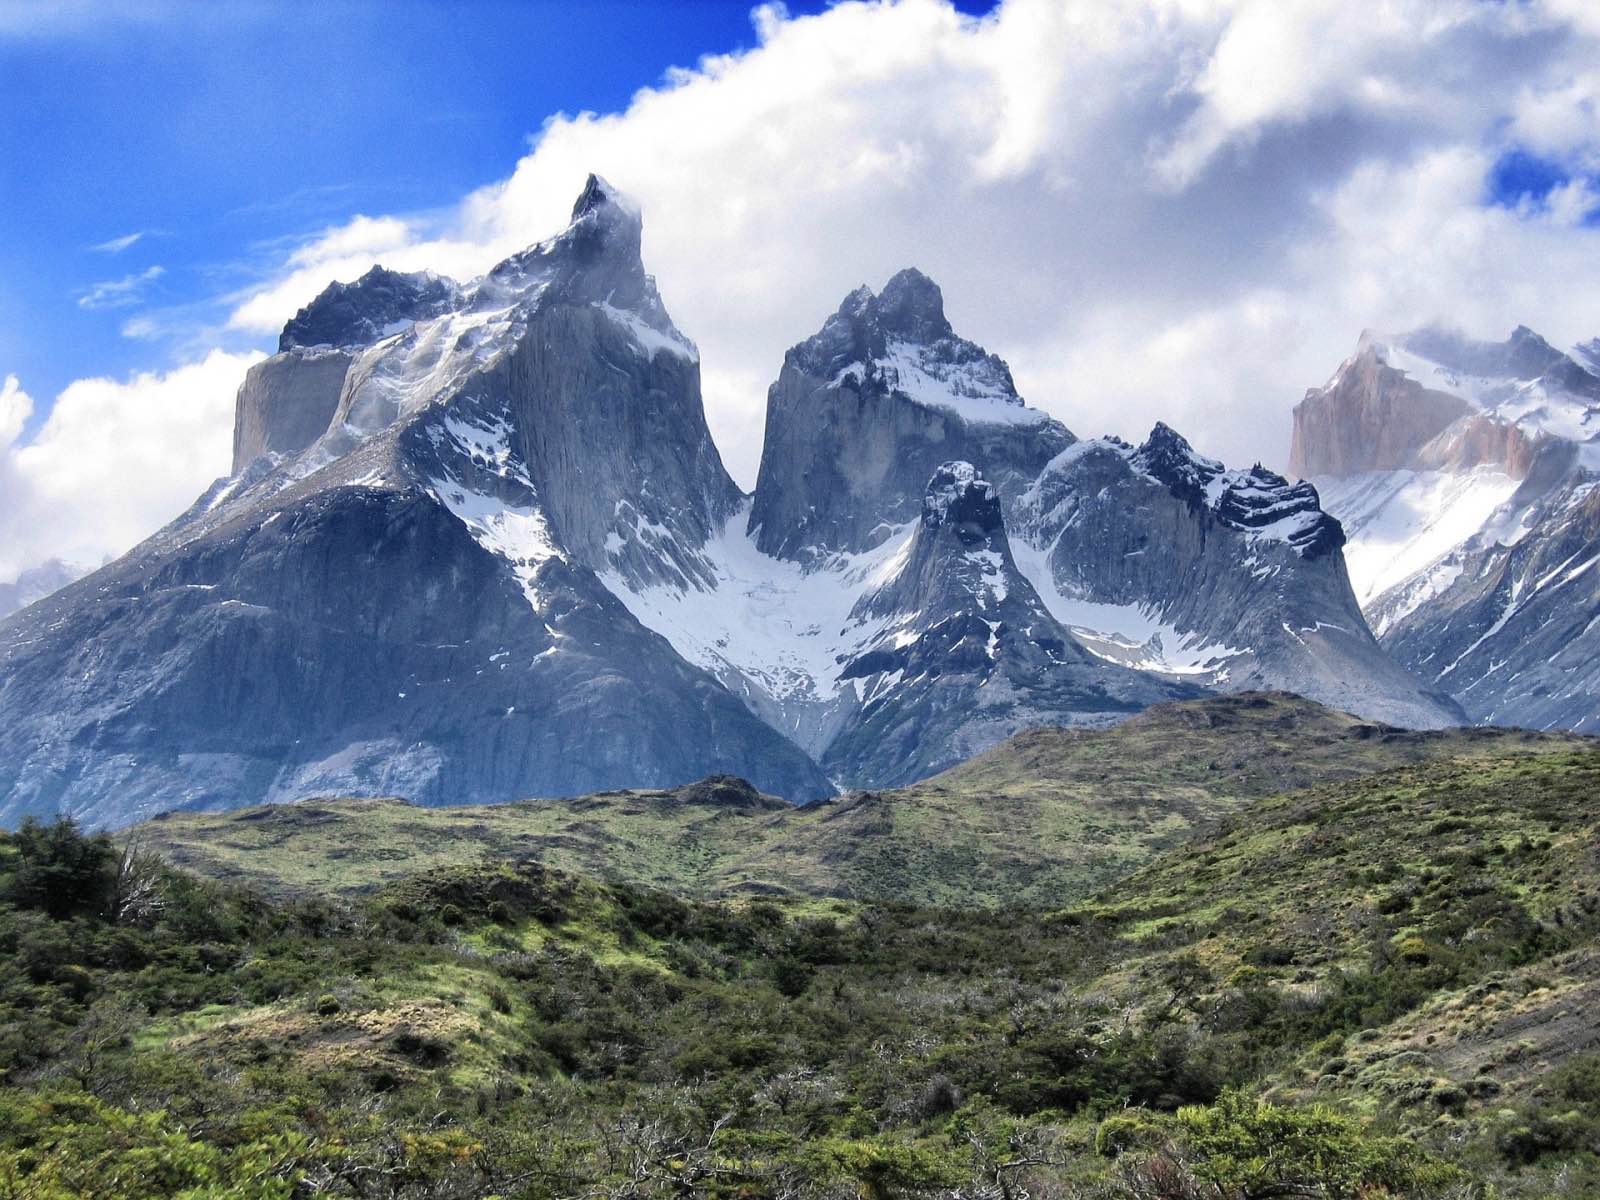 Torres del Paine mountain views - one of Patagonia's most popular hiking destinations